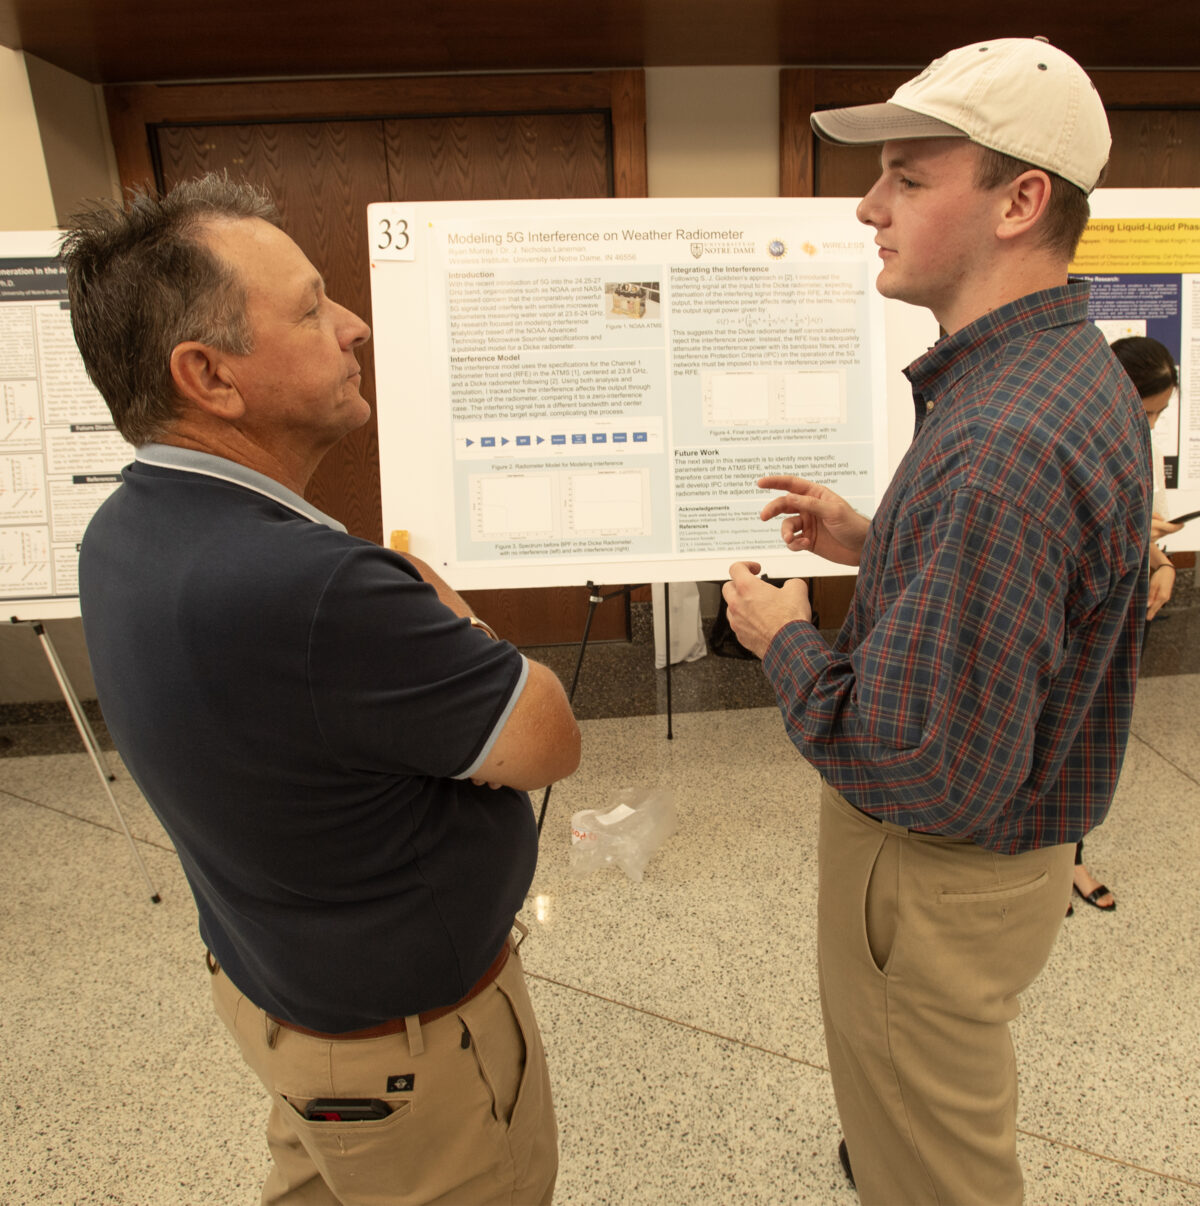 Ryan Murray, AWaRE REU researcher, stands and discusses his research poster at the Student REU Research Symposium. Photo by Wes Evard.